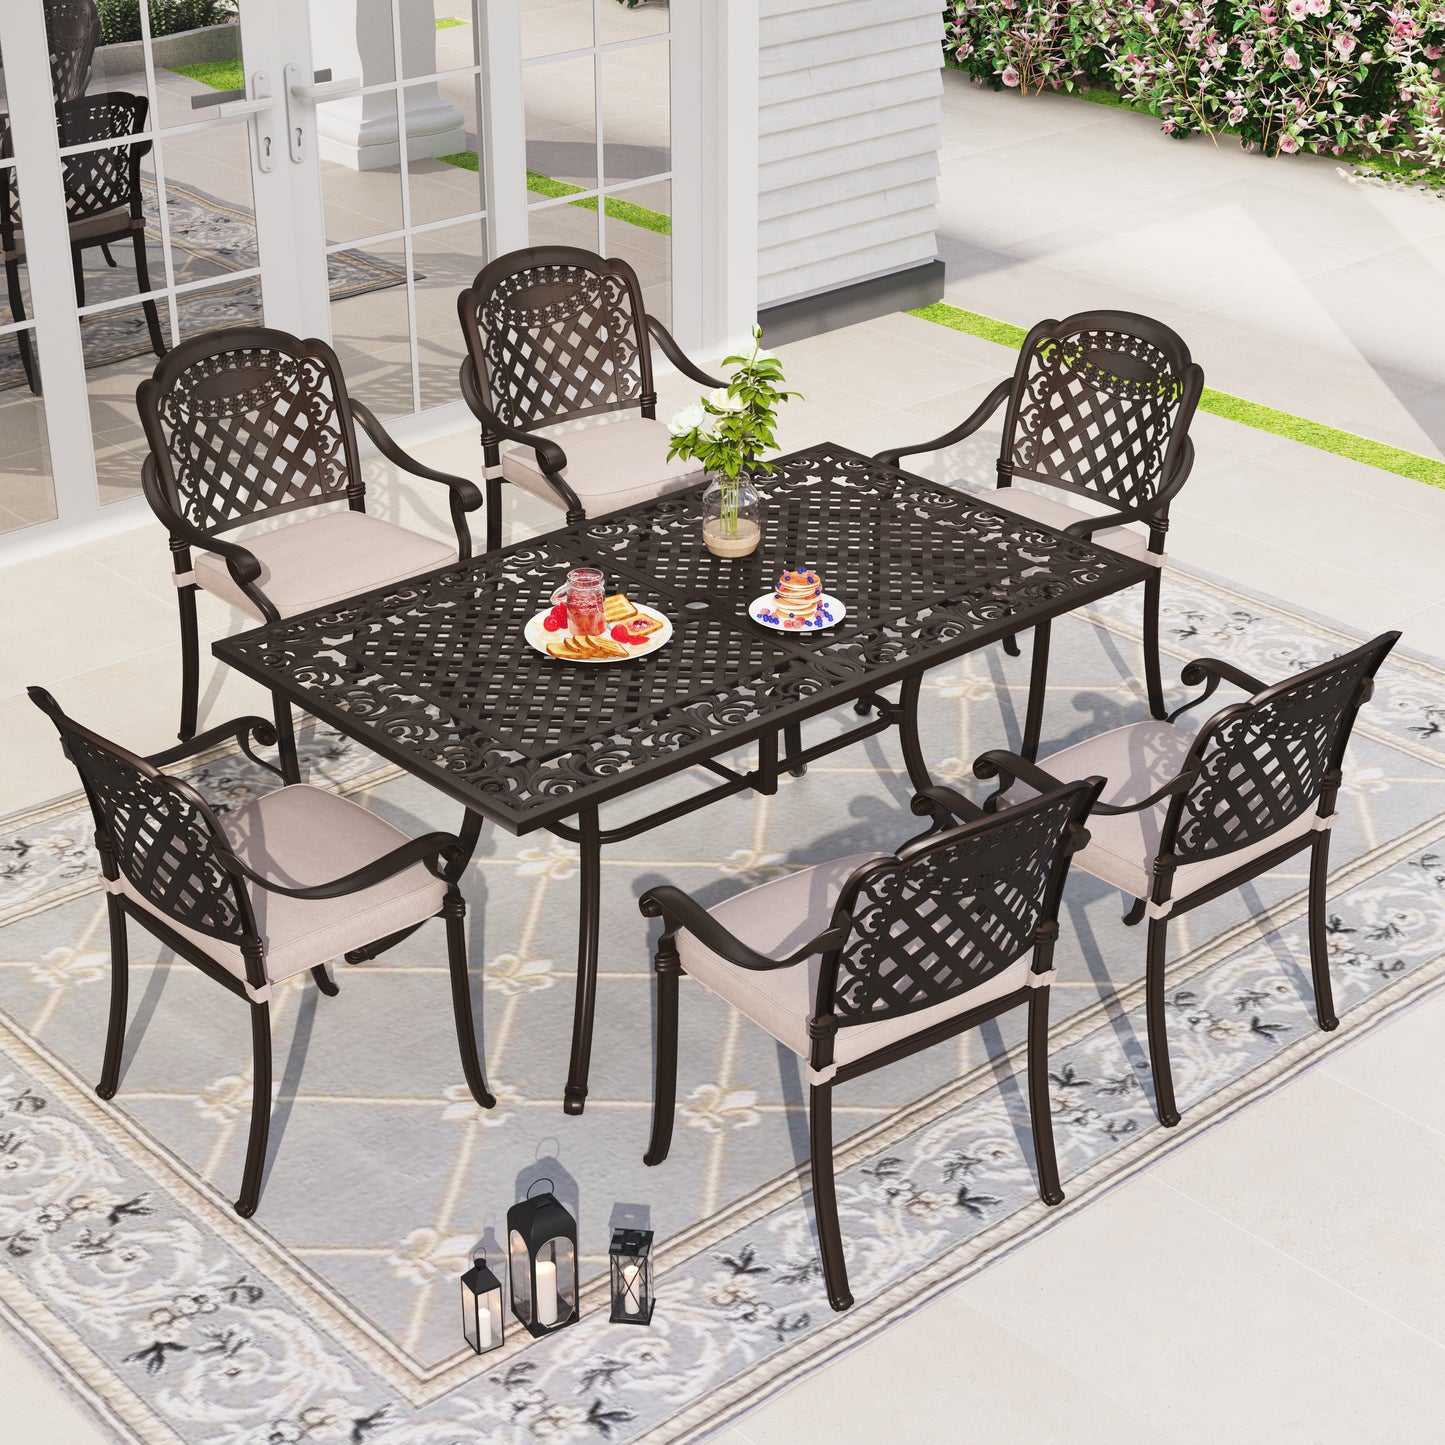 Sophia & William 7 Pieces Patio Dining Set Rectangle Table & 6 Cast Aluminum Patio Dining Chairs with Cushion